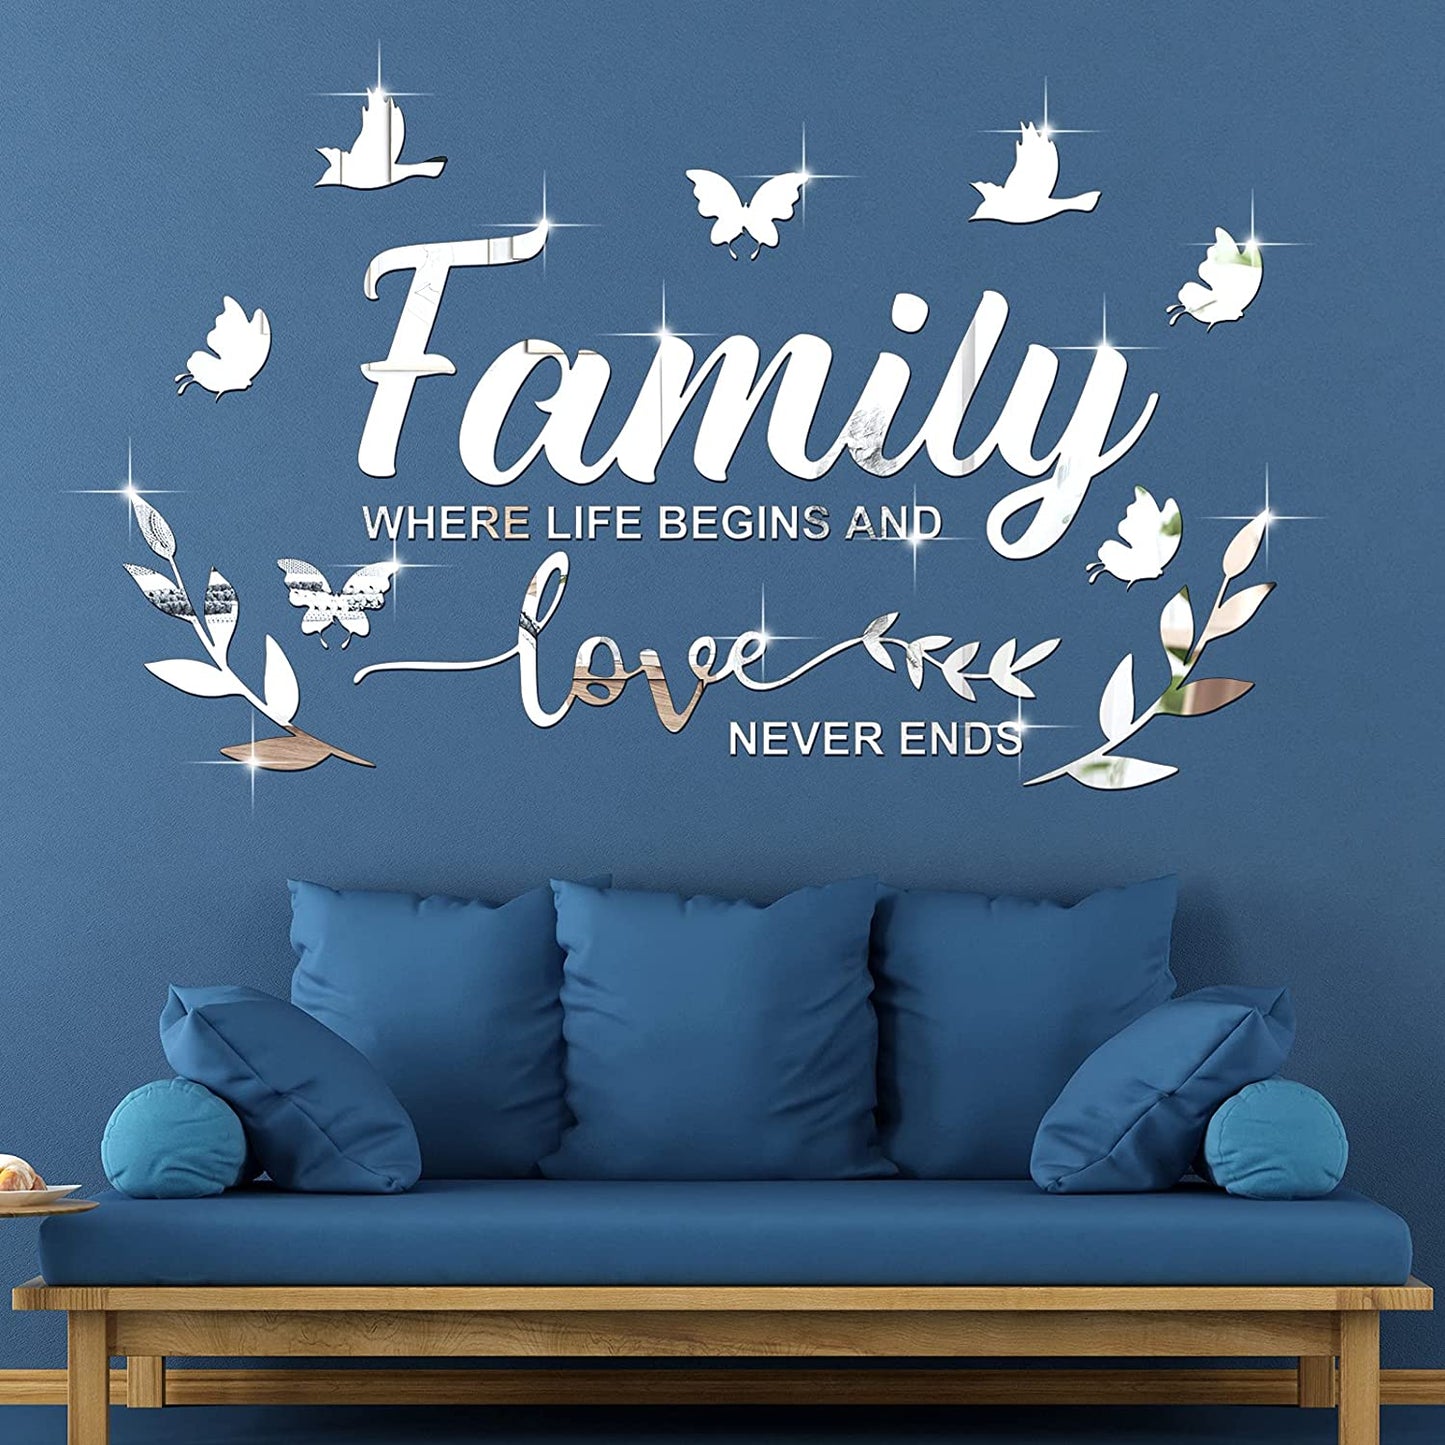 Mirror Family Wall Decor 3D Acrylic Wall Decal Stickers Family Letter Quotes Mirror Decor DIY Removable Wall Art Decals Motivational Butterfly Mural Stickers for Home Decor (Silver)